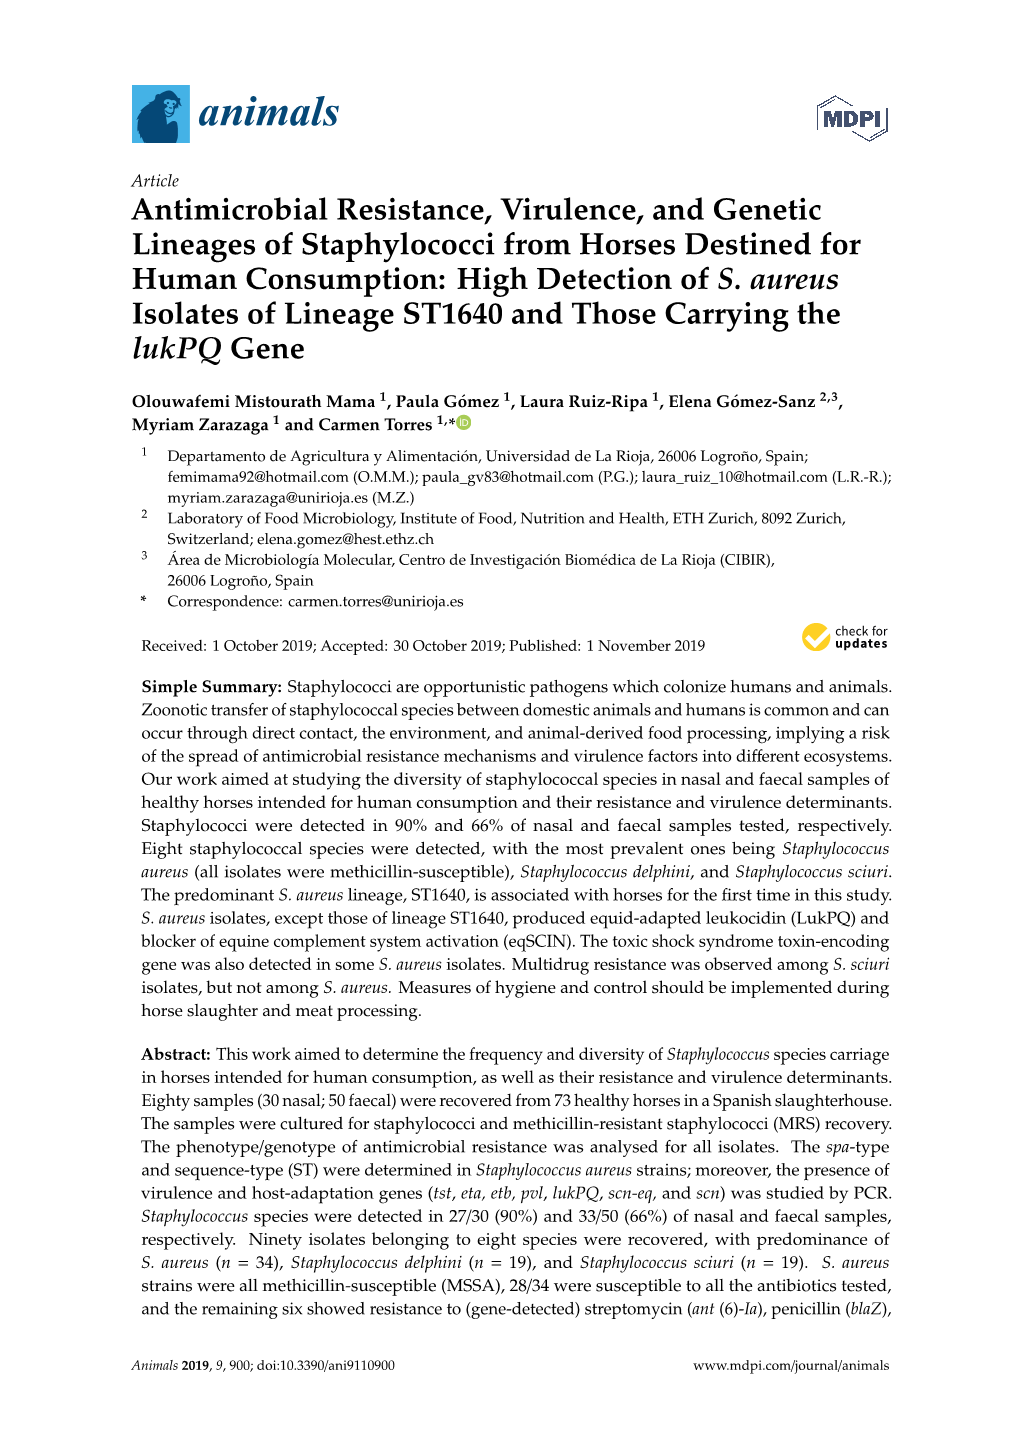 Antimicrobial Resistance, Virulence, and Genetic Lineages of Staphylococci from Horses Destined for Human Consumption: High Detection of S